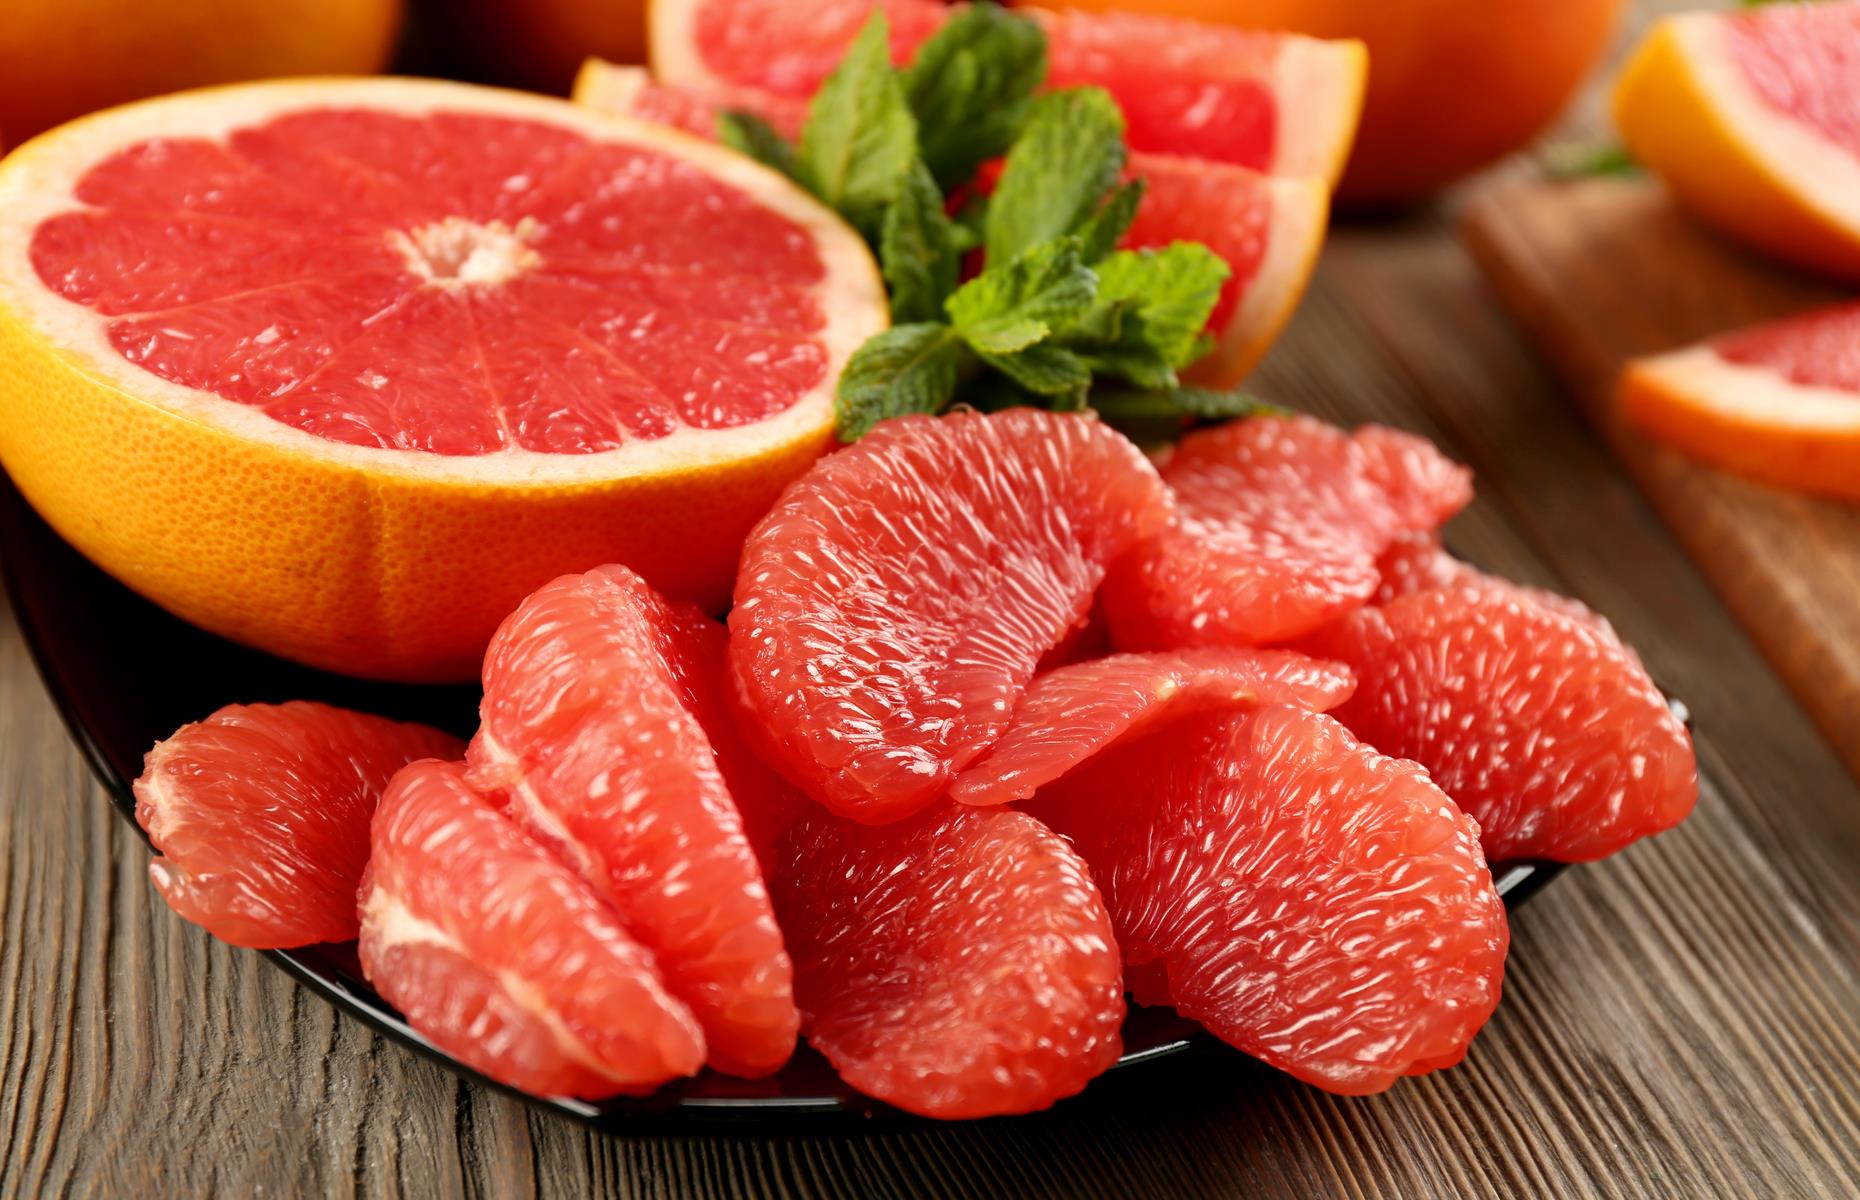 <p>The grapefruit diet, hugely popular back in the 1970s, essentially involves eating a grapefruit at every meal, sometimes as a replacement for a complete meal. Like all weight loss diets, it works to whittle your waistline through calorie restriction. Interestingly though, research has since found that components in grapefruit may have a <a href="https://nature.berkeley.edu/news/2014/10/grapefruit-juice-may-help-stem-weight-gain-lower-glucose-and-insulin-levels">beneficial effect on blood glucose</a> and insulin levels, at least in mice, and that could help prevent obesity.</p>